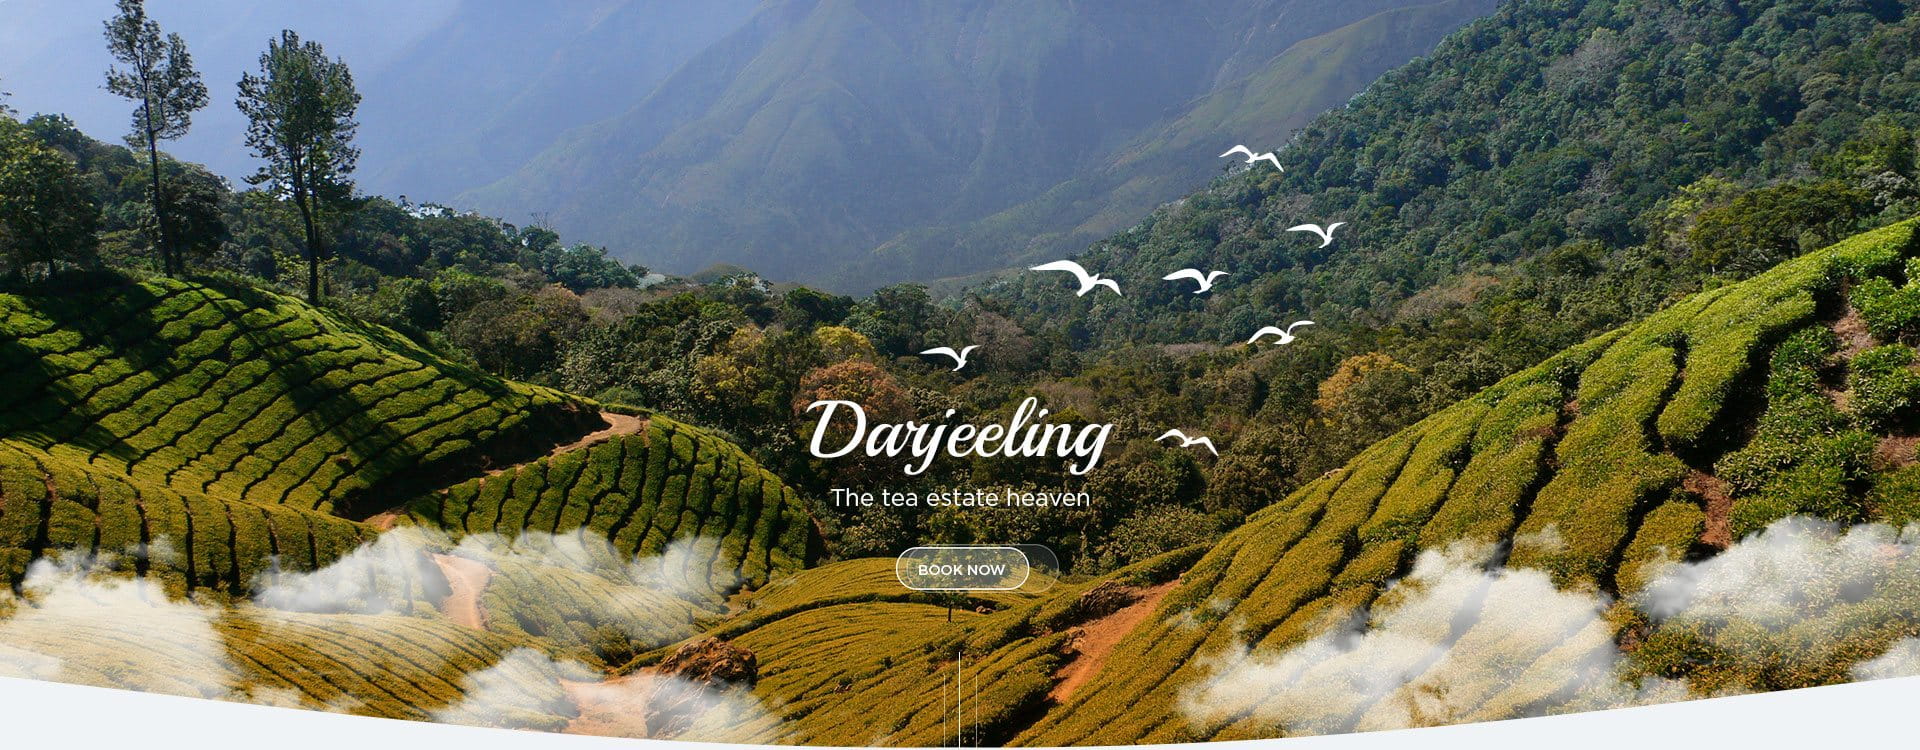 Darjeeling tours and travel agency - Eastern Meadows Tour